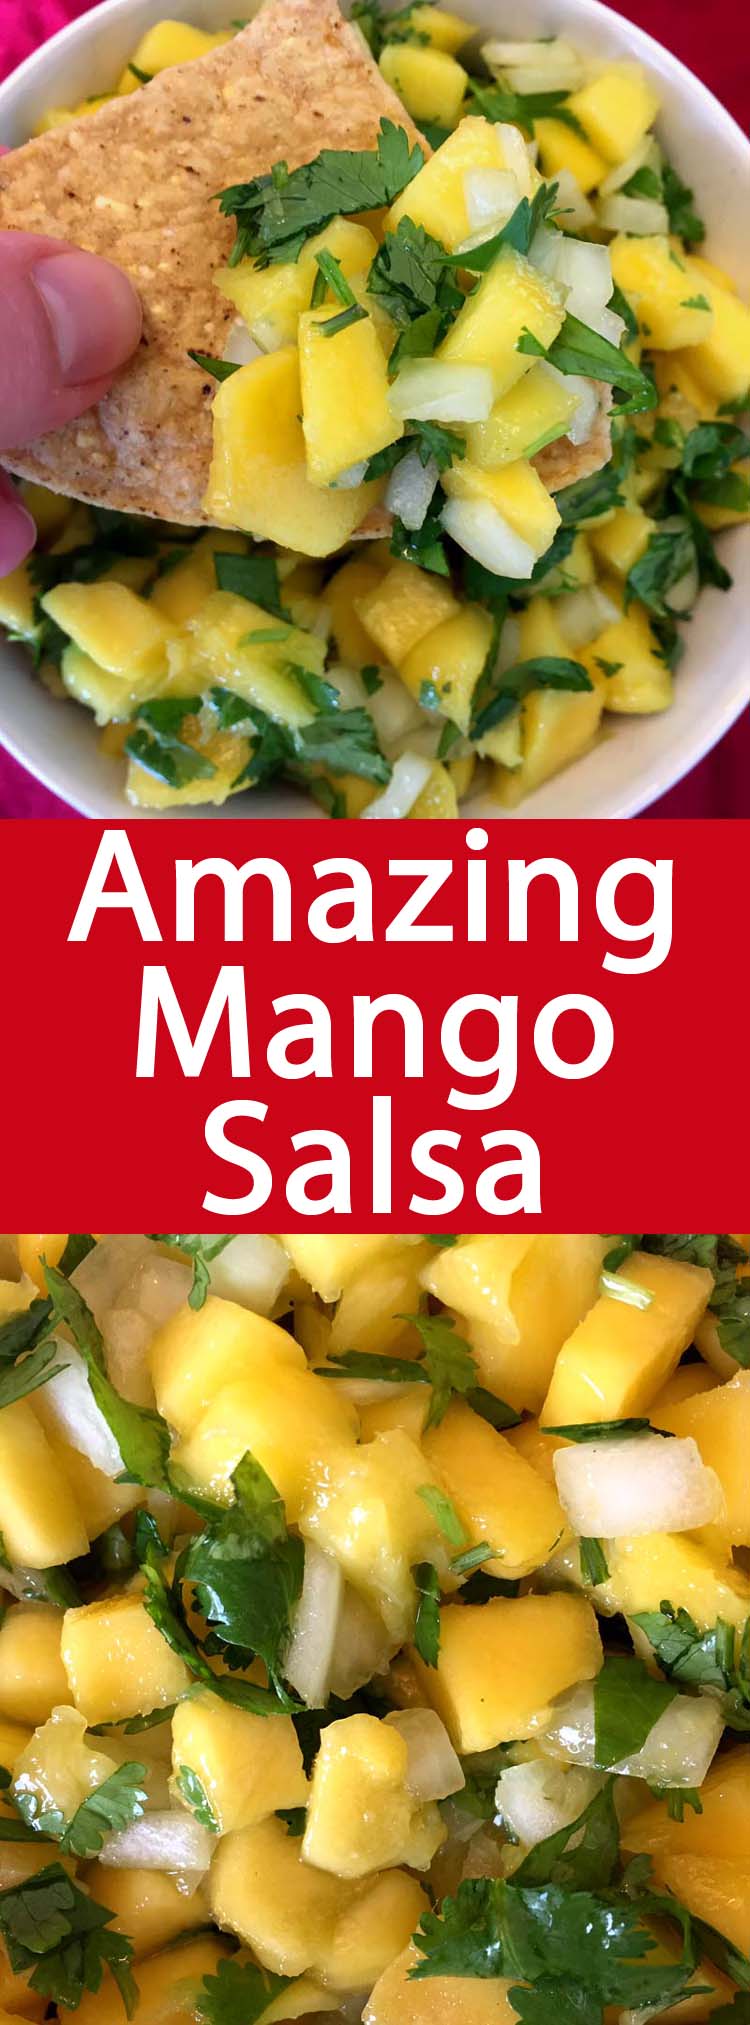 This mango salsa recipe is amazing! So easy to make, healthy and delicious! Perfect for a Mexican fiesta! So addictive, you can eat the whole bowl!